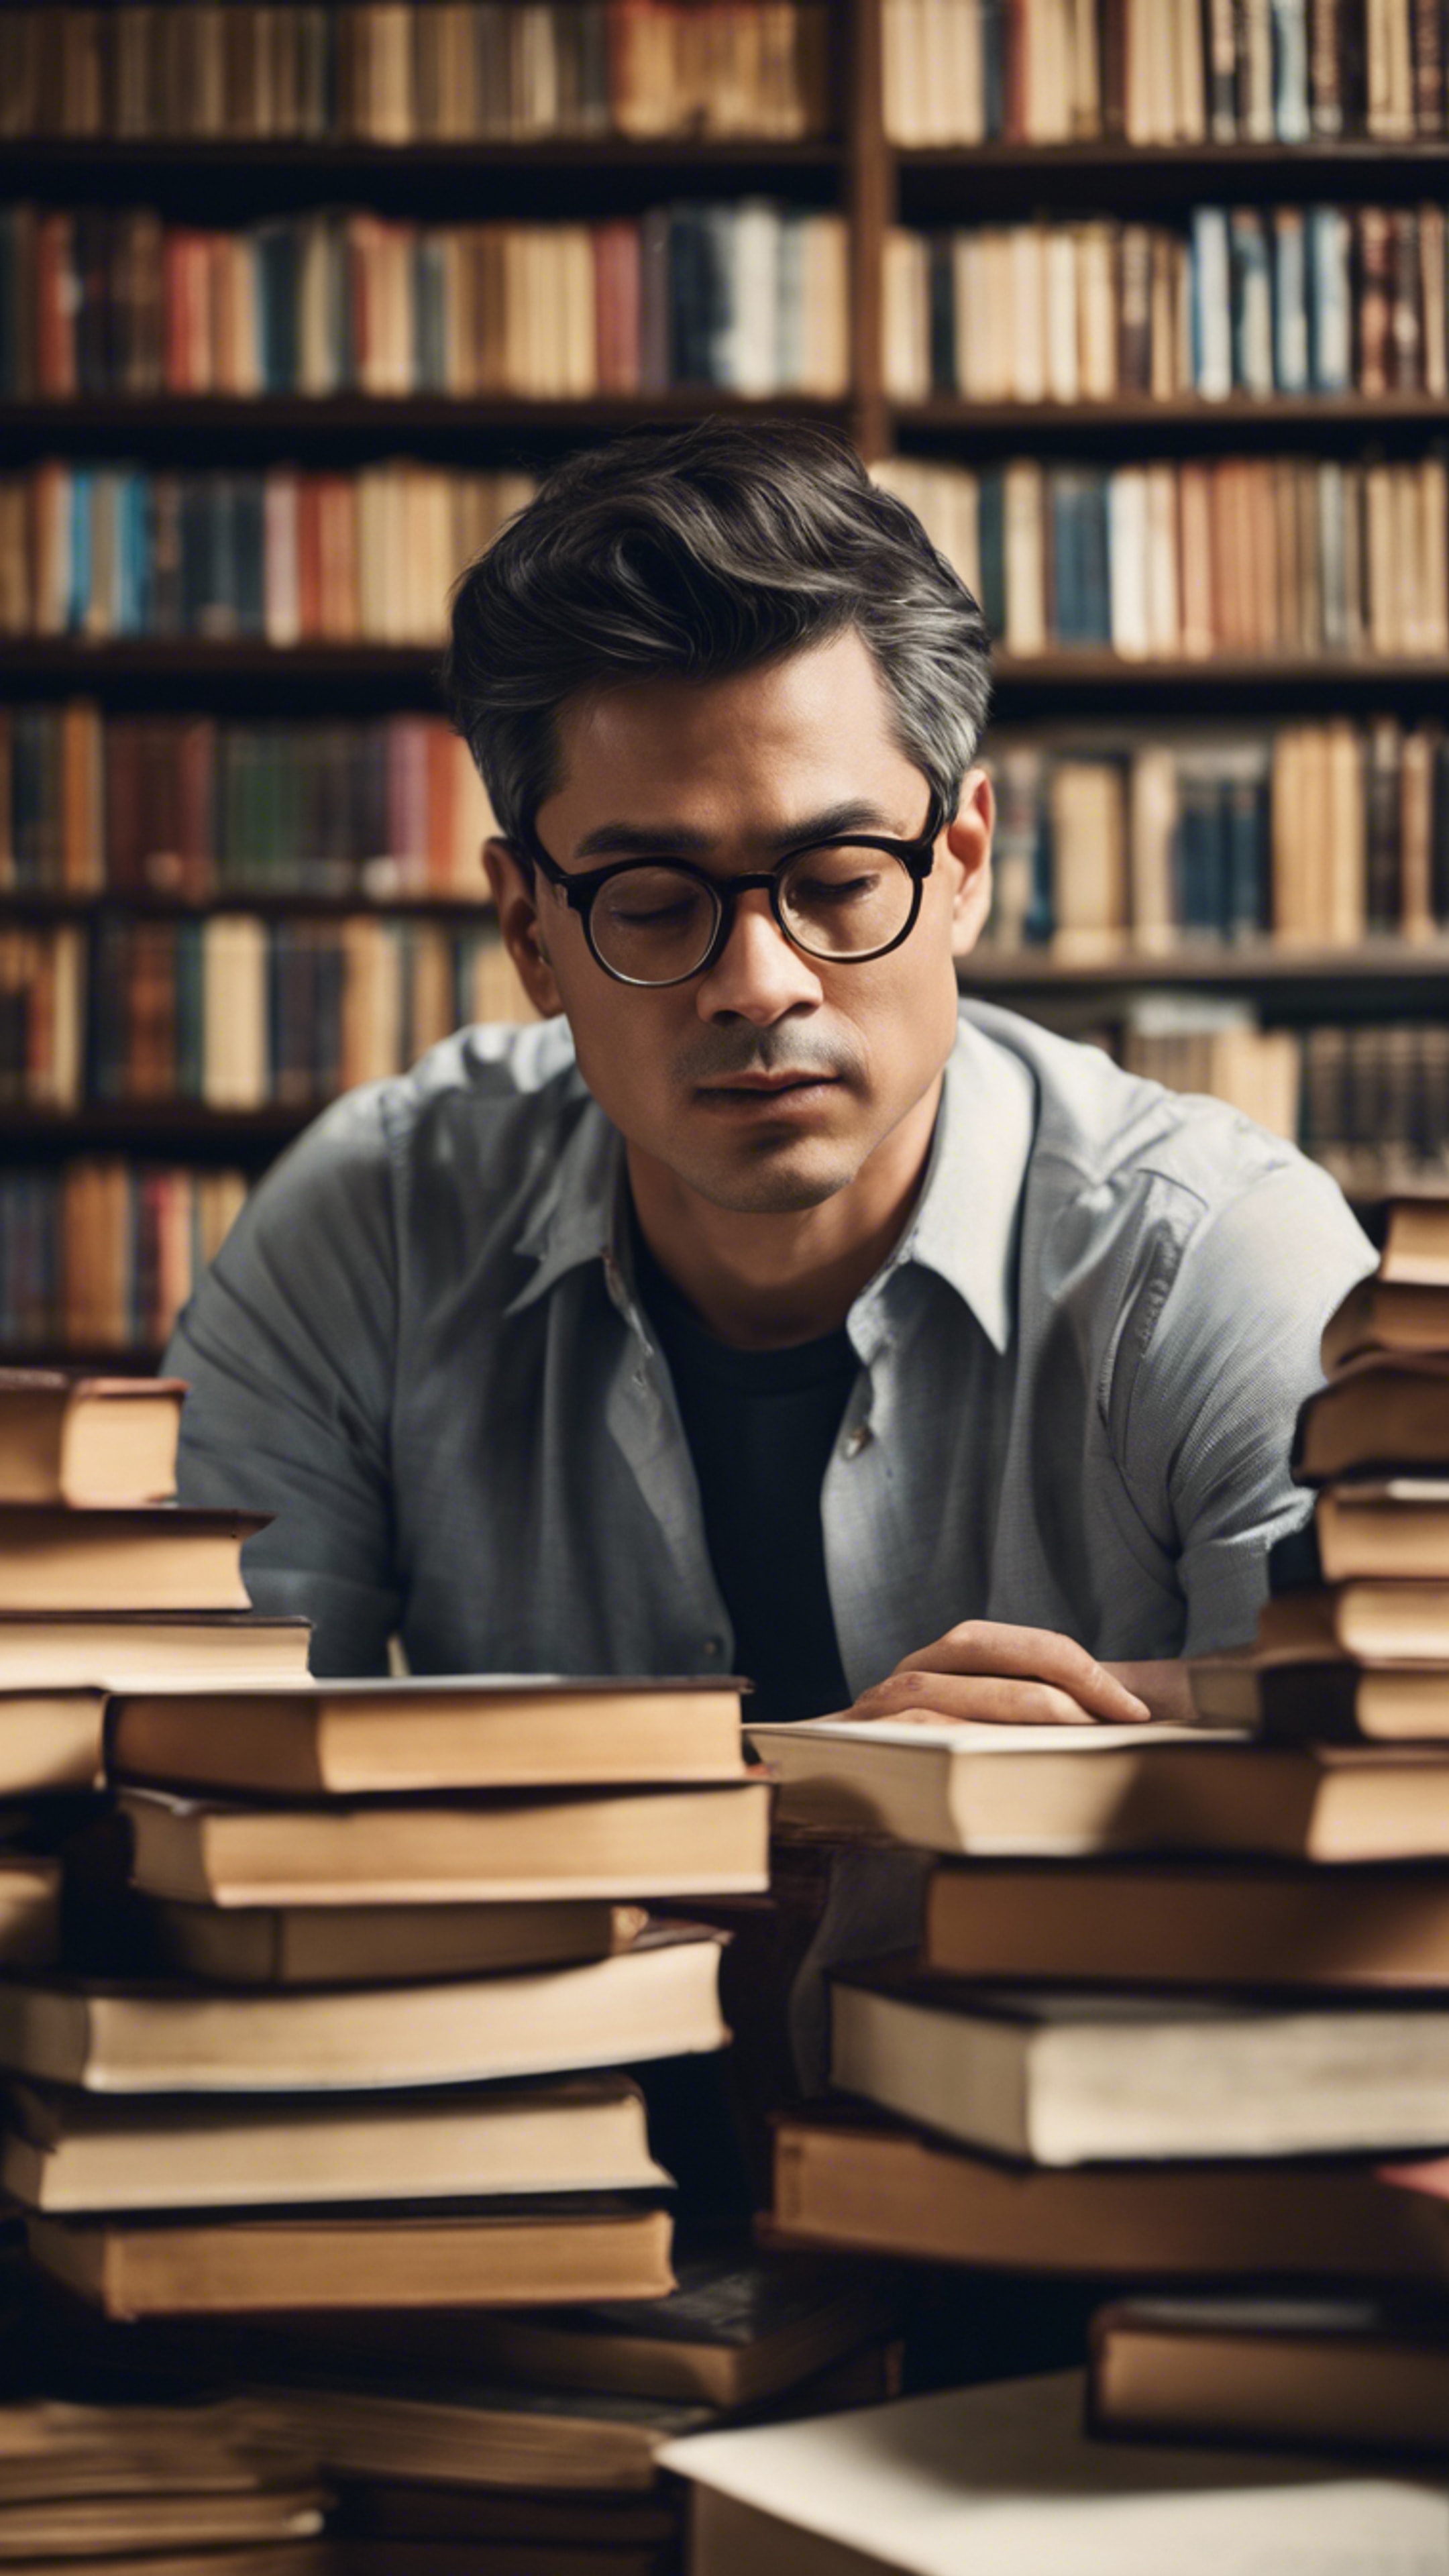 An intelligent man in glasses, deeply engrossed in his studies surrounded by stacks of books in a quiet library. Шпалери[88f4531613da45079a41]